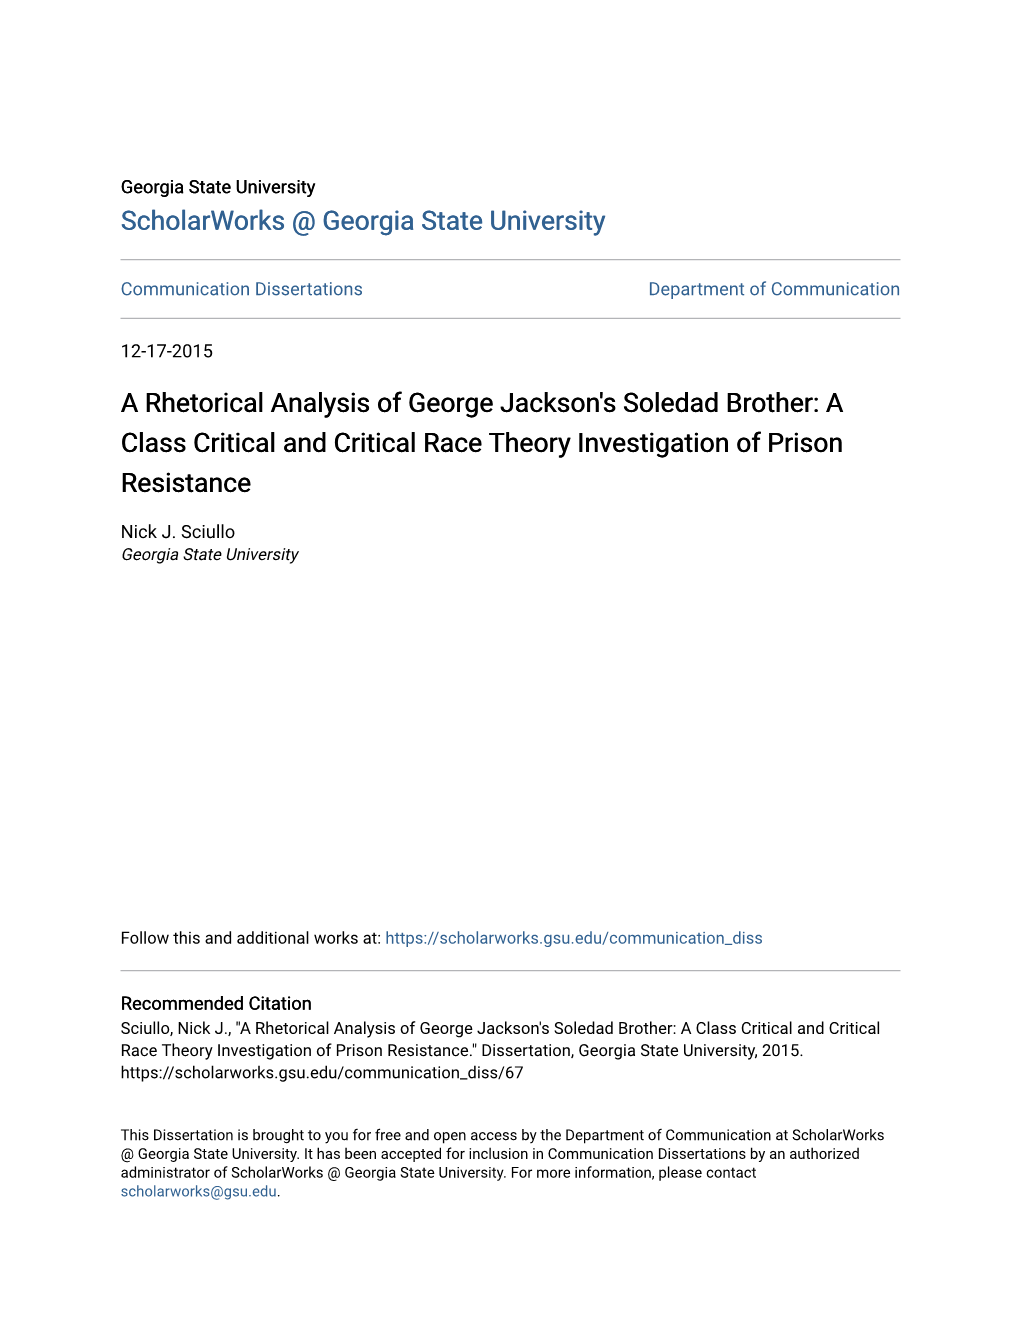 A Rhetorical Analysis of George Jackson's Soledad Brother: a Class Critical and Critical Race Theory Investigation of Prison Resistance